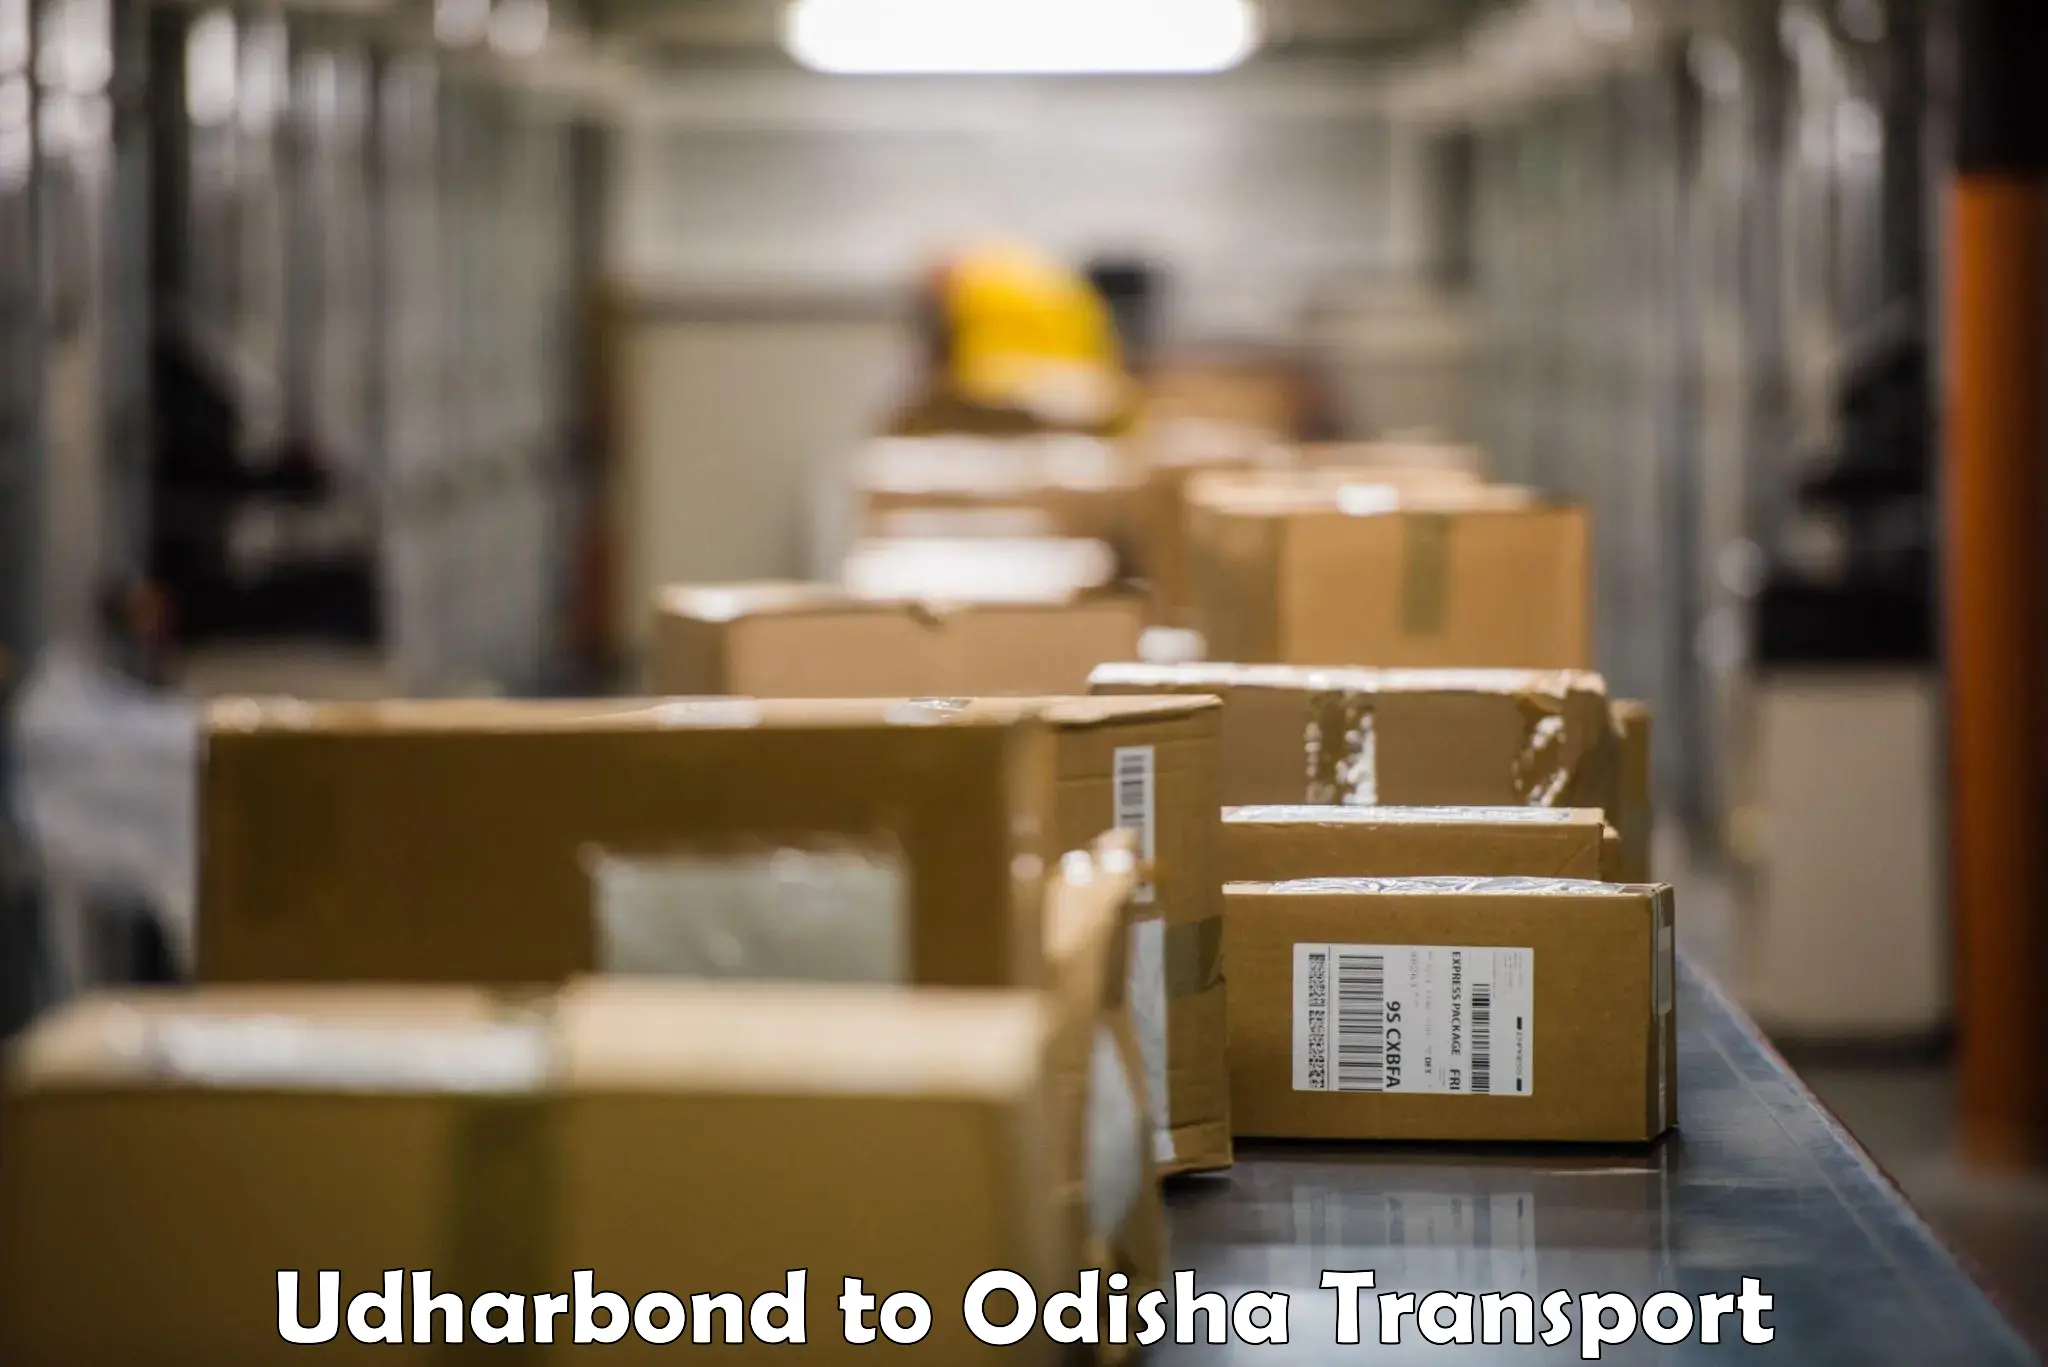 Transport shared services in Udharbond to Talcher